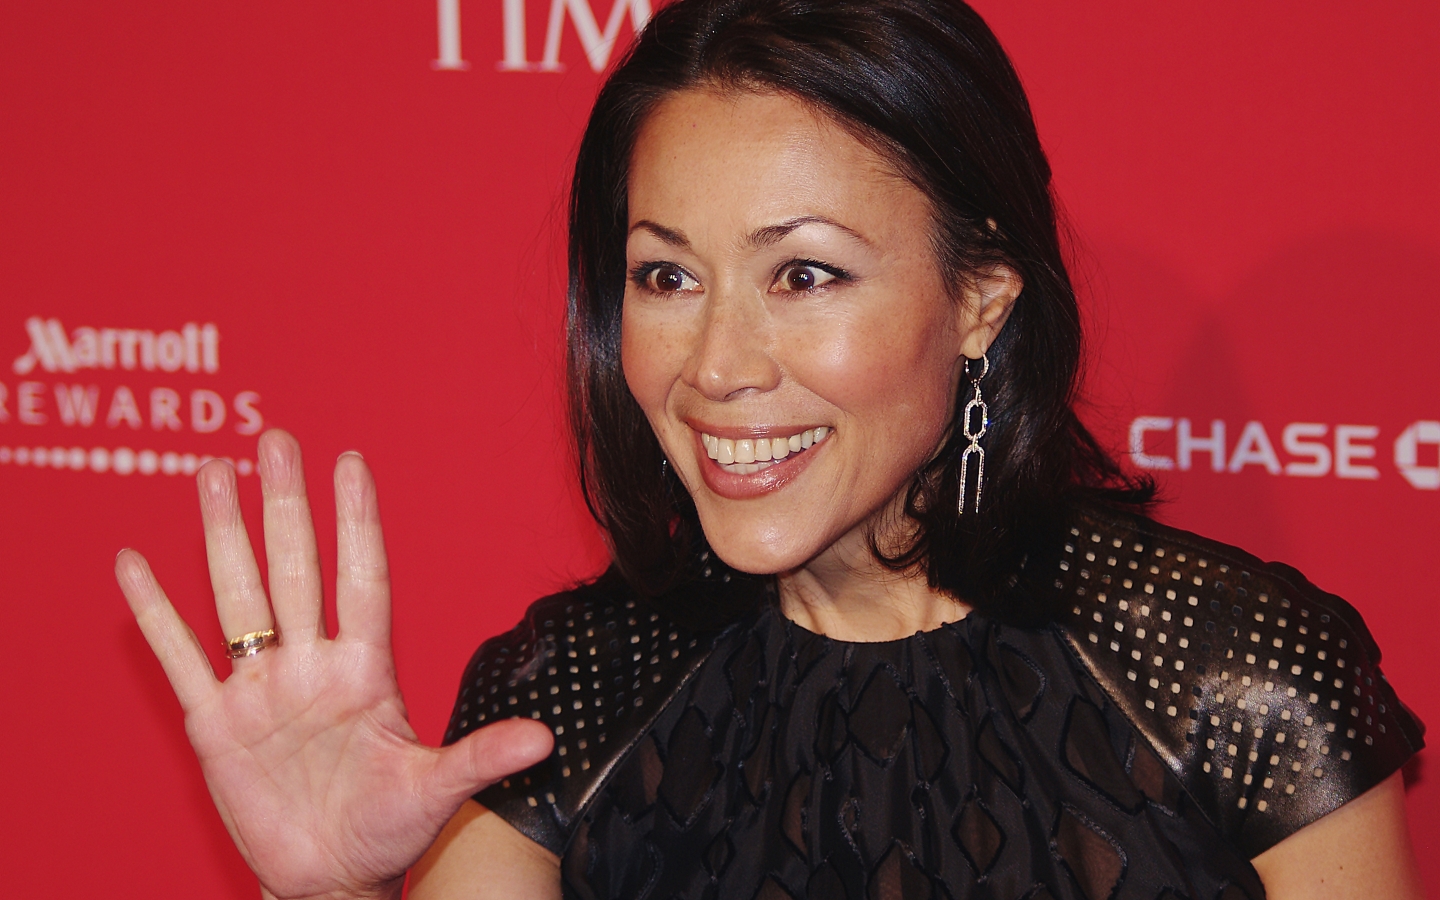 Ann Curry Look for 1440 x 900 widescreen resolution